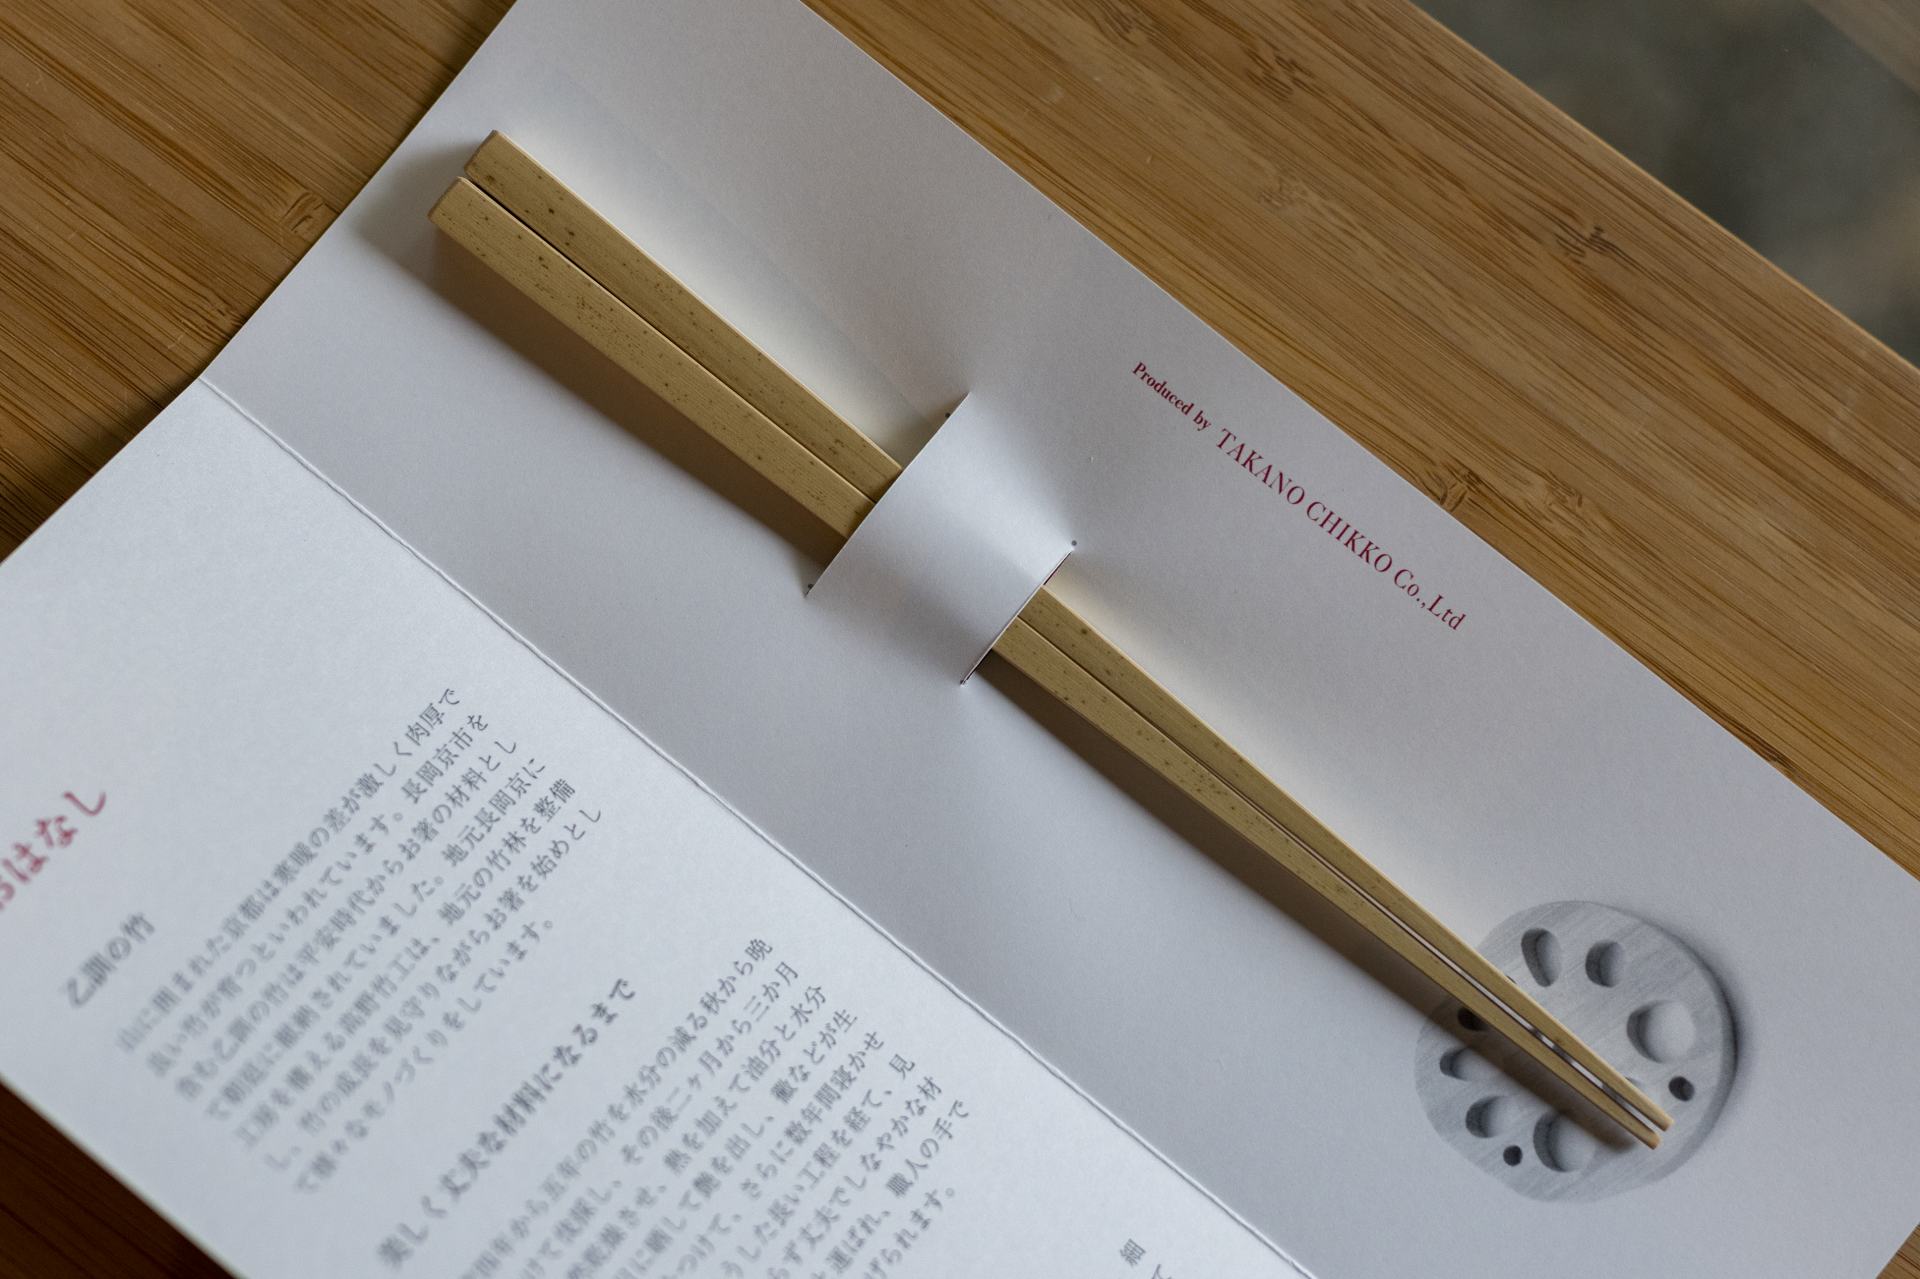 A pair of hand-planed bamboo chopsticks makes for a one-of-a-kind Kyoto souvenir.